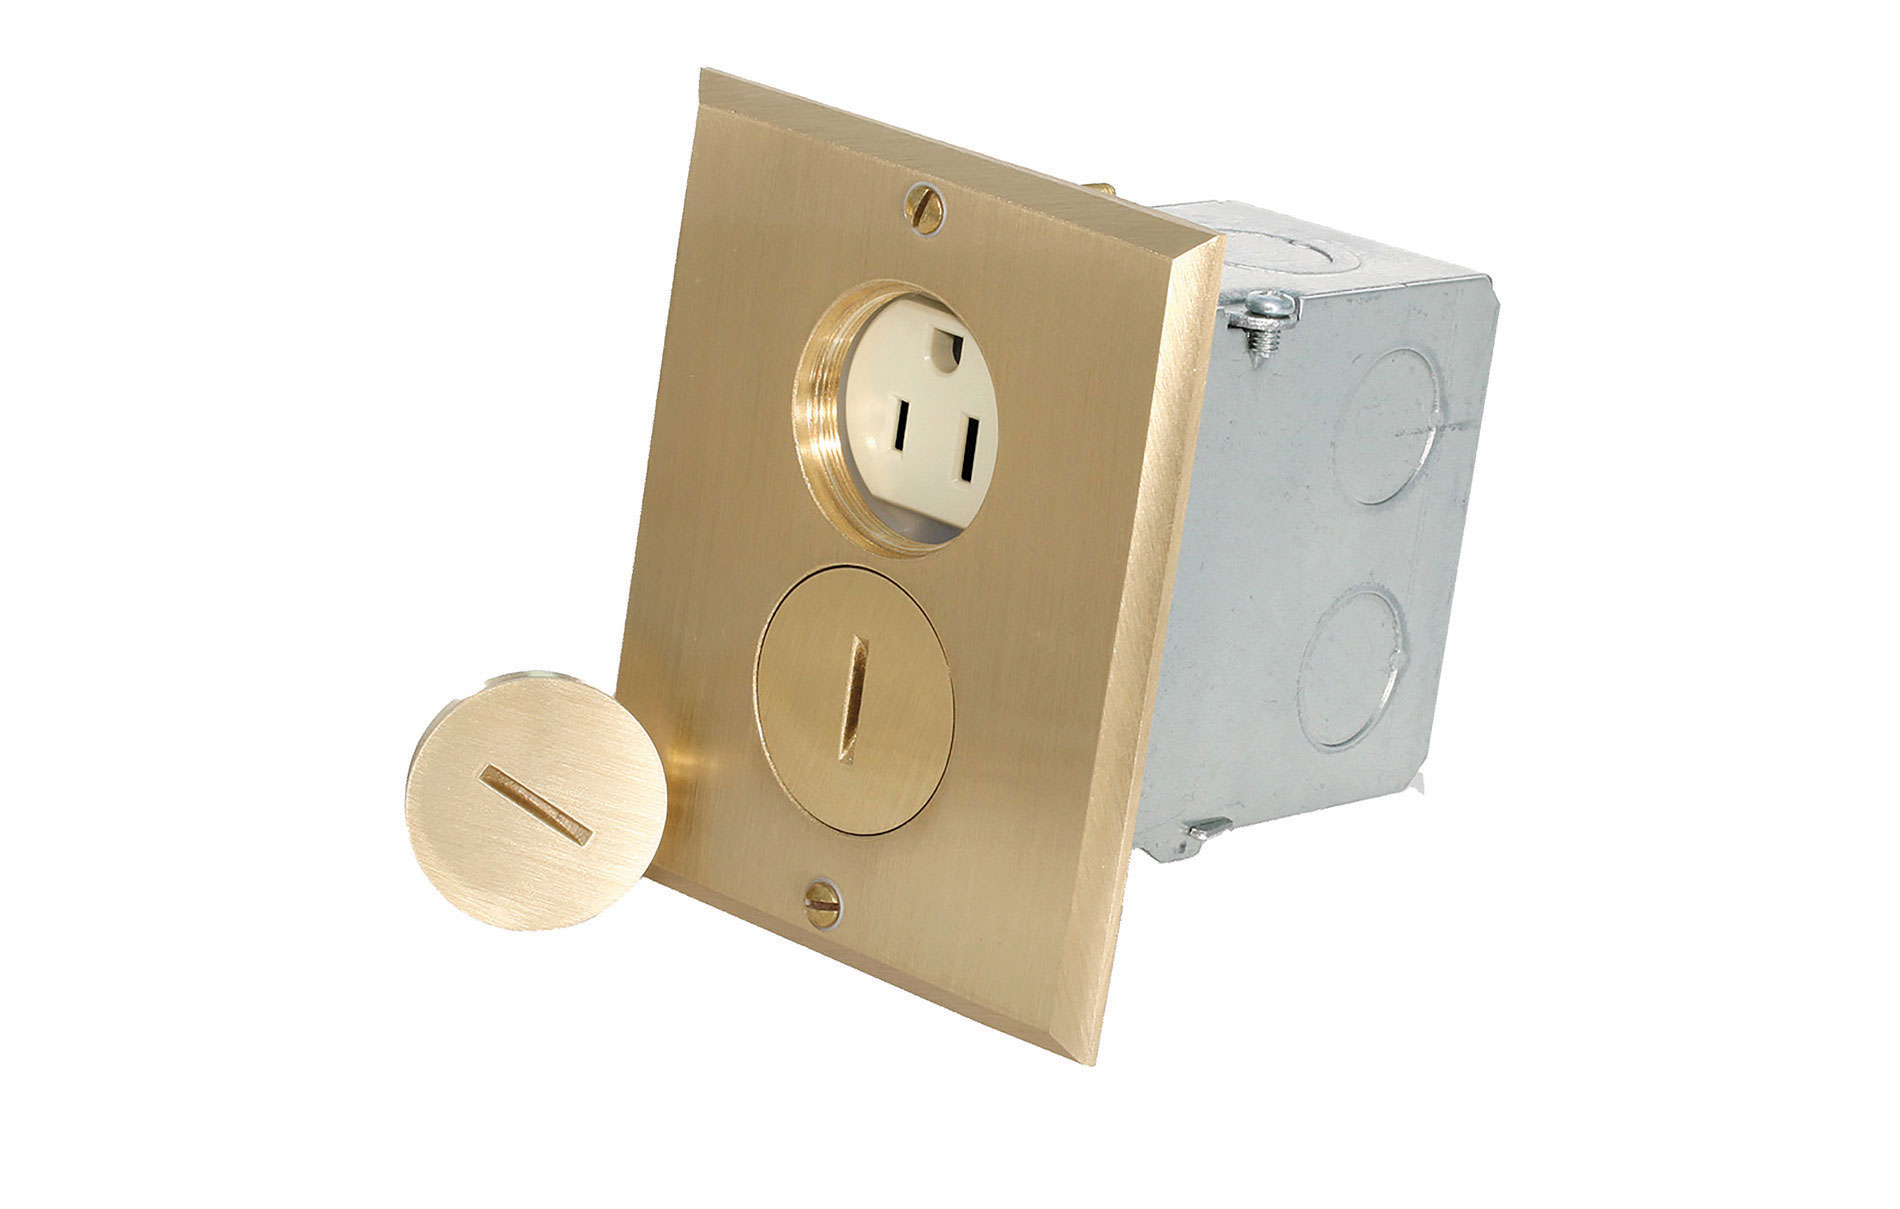 Gold and silver receptacle floor box. Image by Leviton.